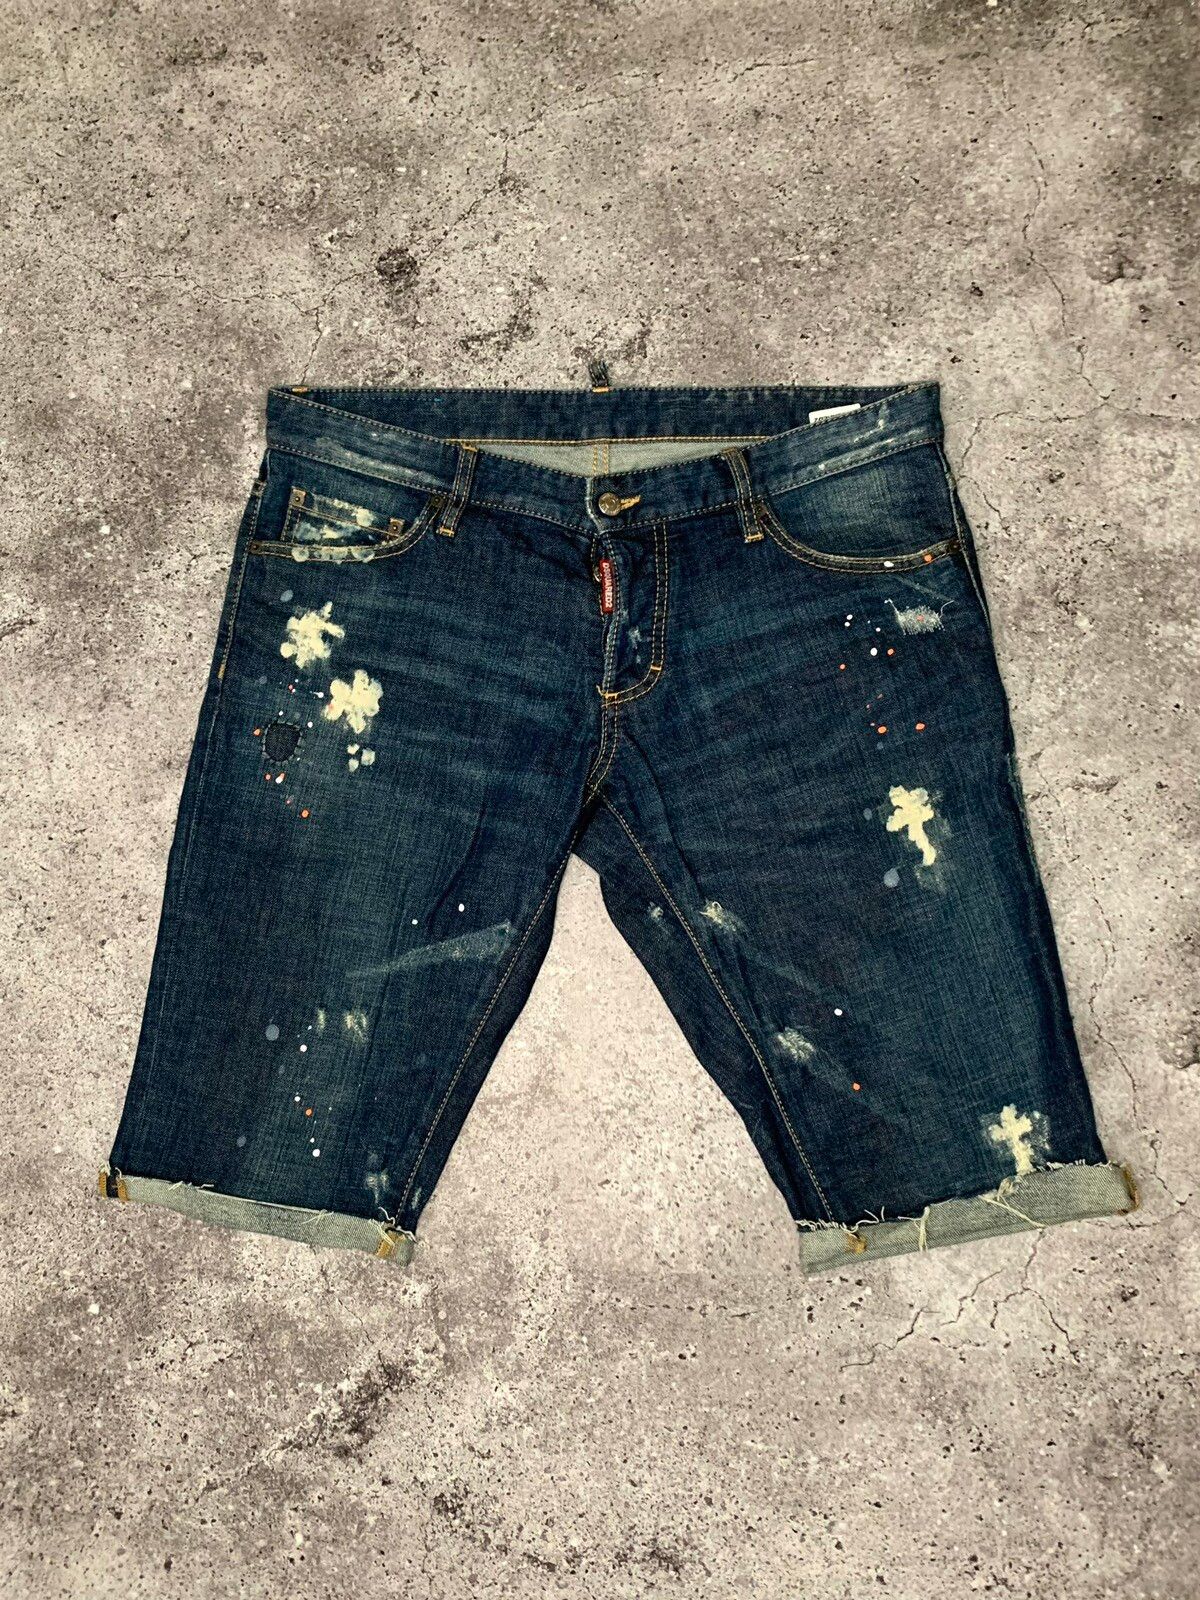 Dsquared2 Dsquared shorts jeans | Grailed